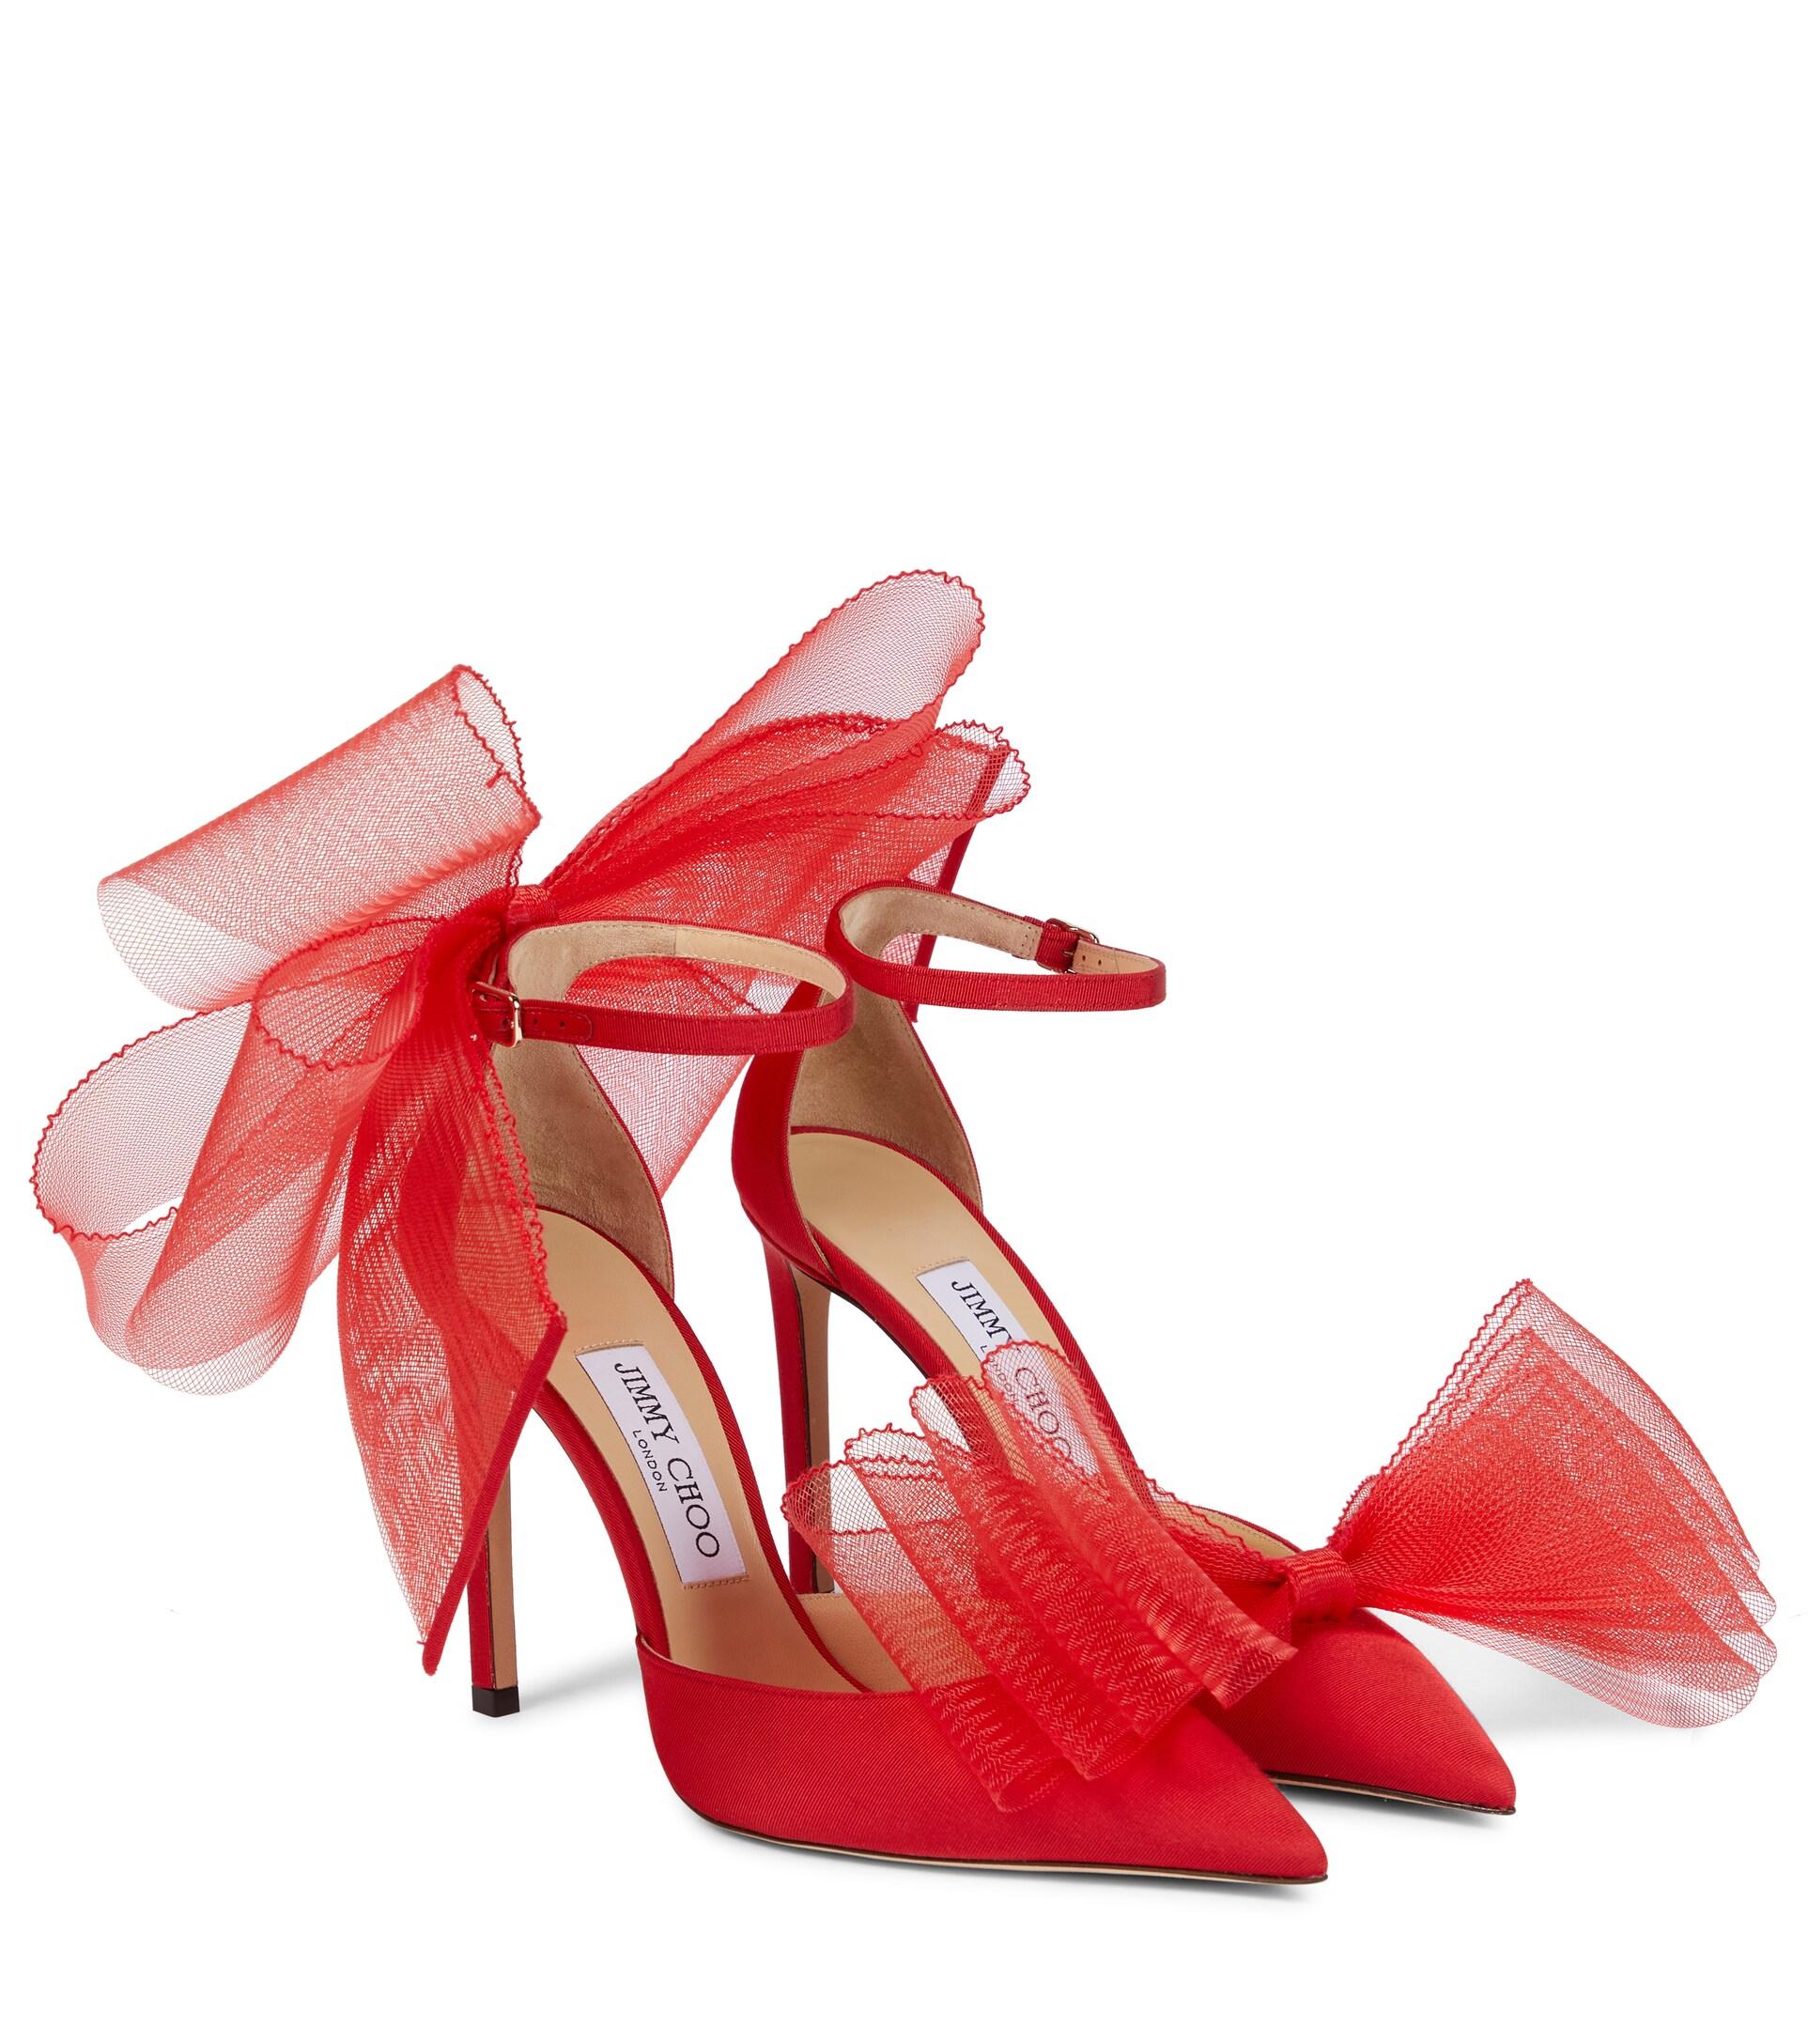 Jimmy Choo Averly 100 Bow-trimmed Pumps in Red | Lyst